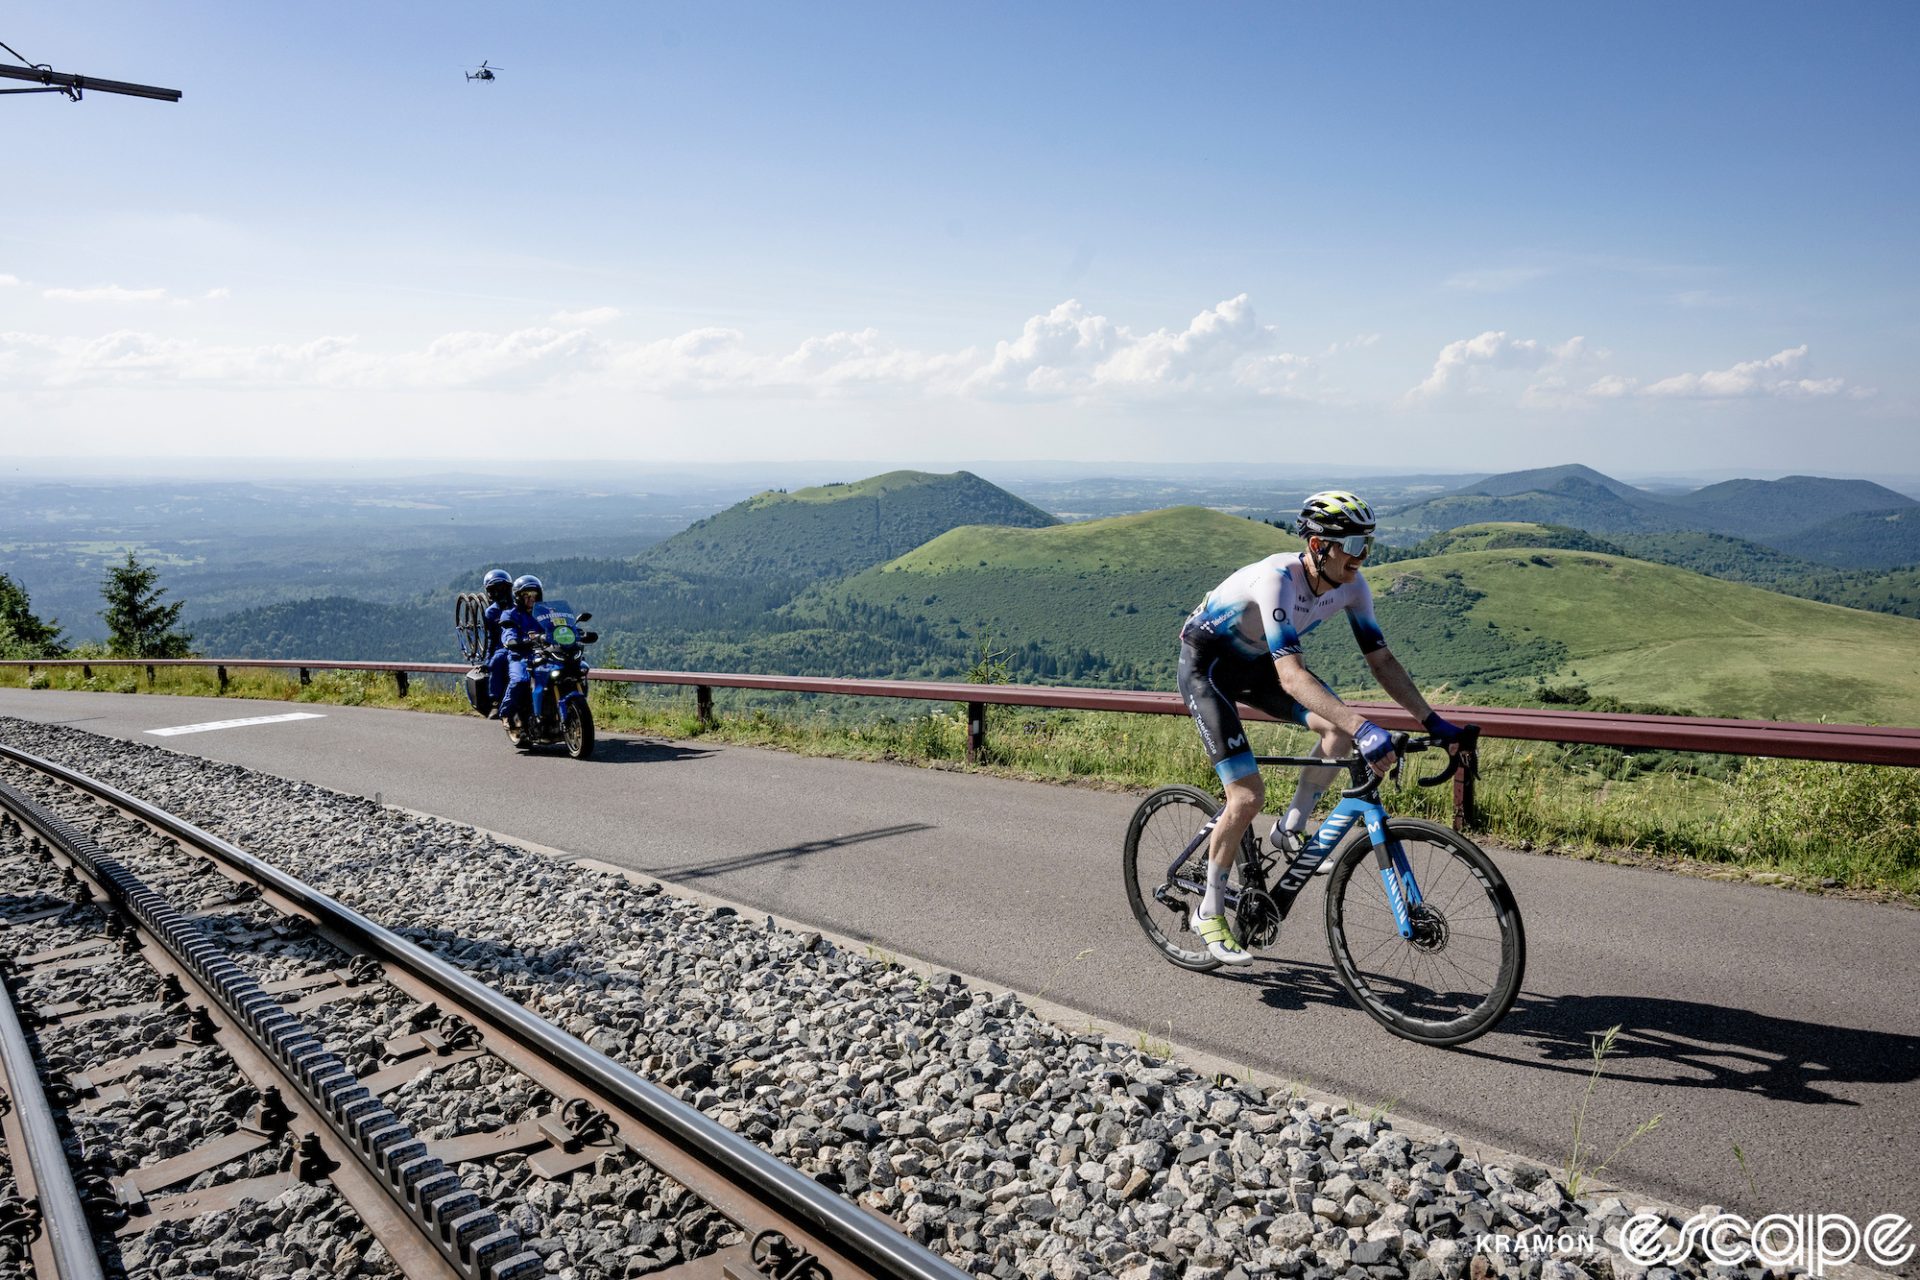 Matteo Jorgenson, all alone on the Puy de Dôme finish climb of stage 9 of the 2023 Tour de France. He's alone in the breakaway, on a road closed to fans. Behind, the valley and low hills of the remnant volcanoes of the Massif Central are seen, green and verdant under a pale blue sky. A lone blue Shimano neutral service moto follows, and the cog summit railway stretches down the road at left.